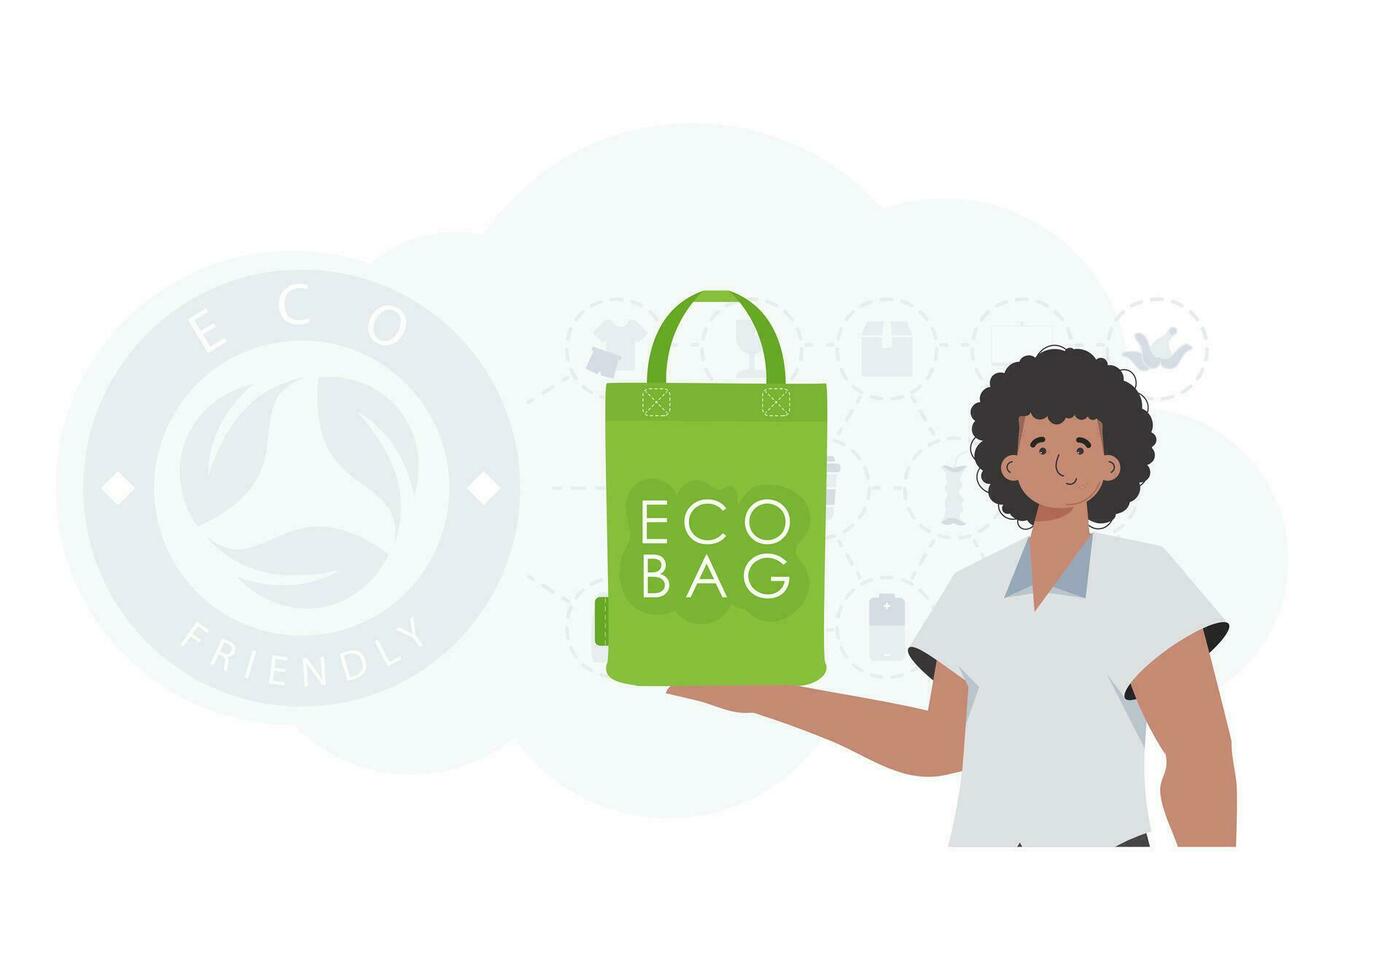 The concept of ecology and care for the environment. The guy is holding an ECO BAG in his hands. Fashion trend vector illustration.